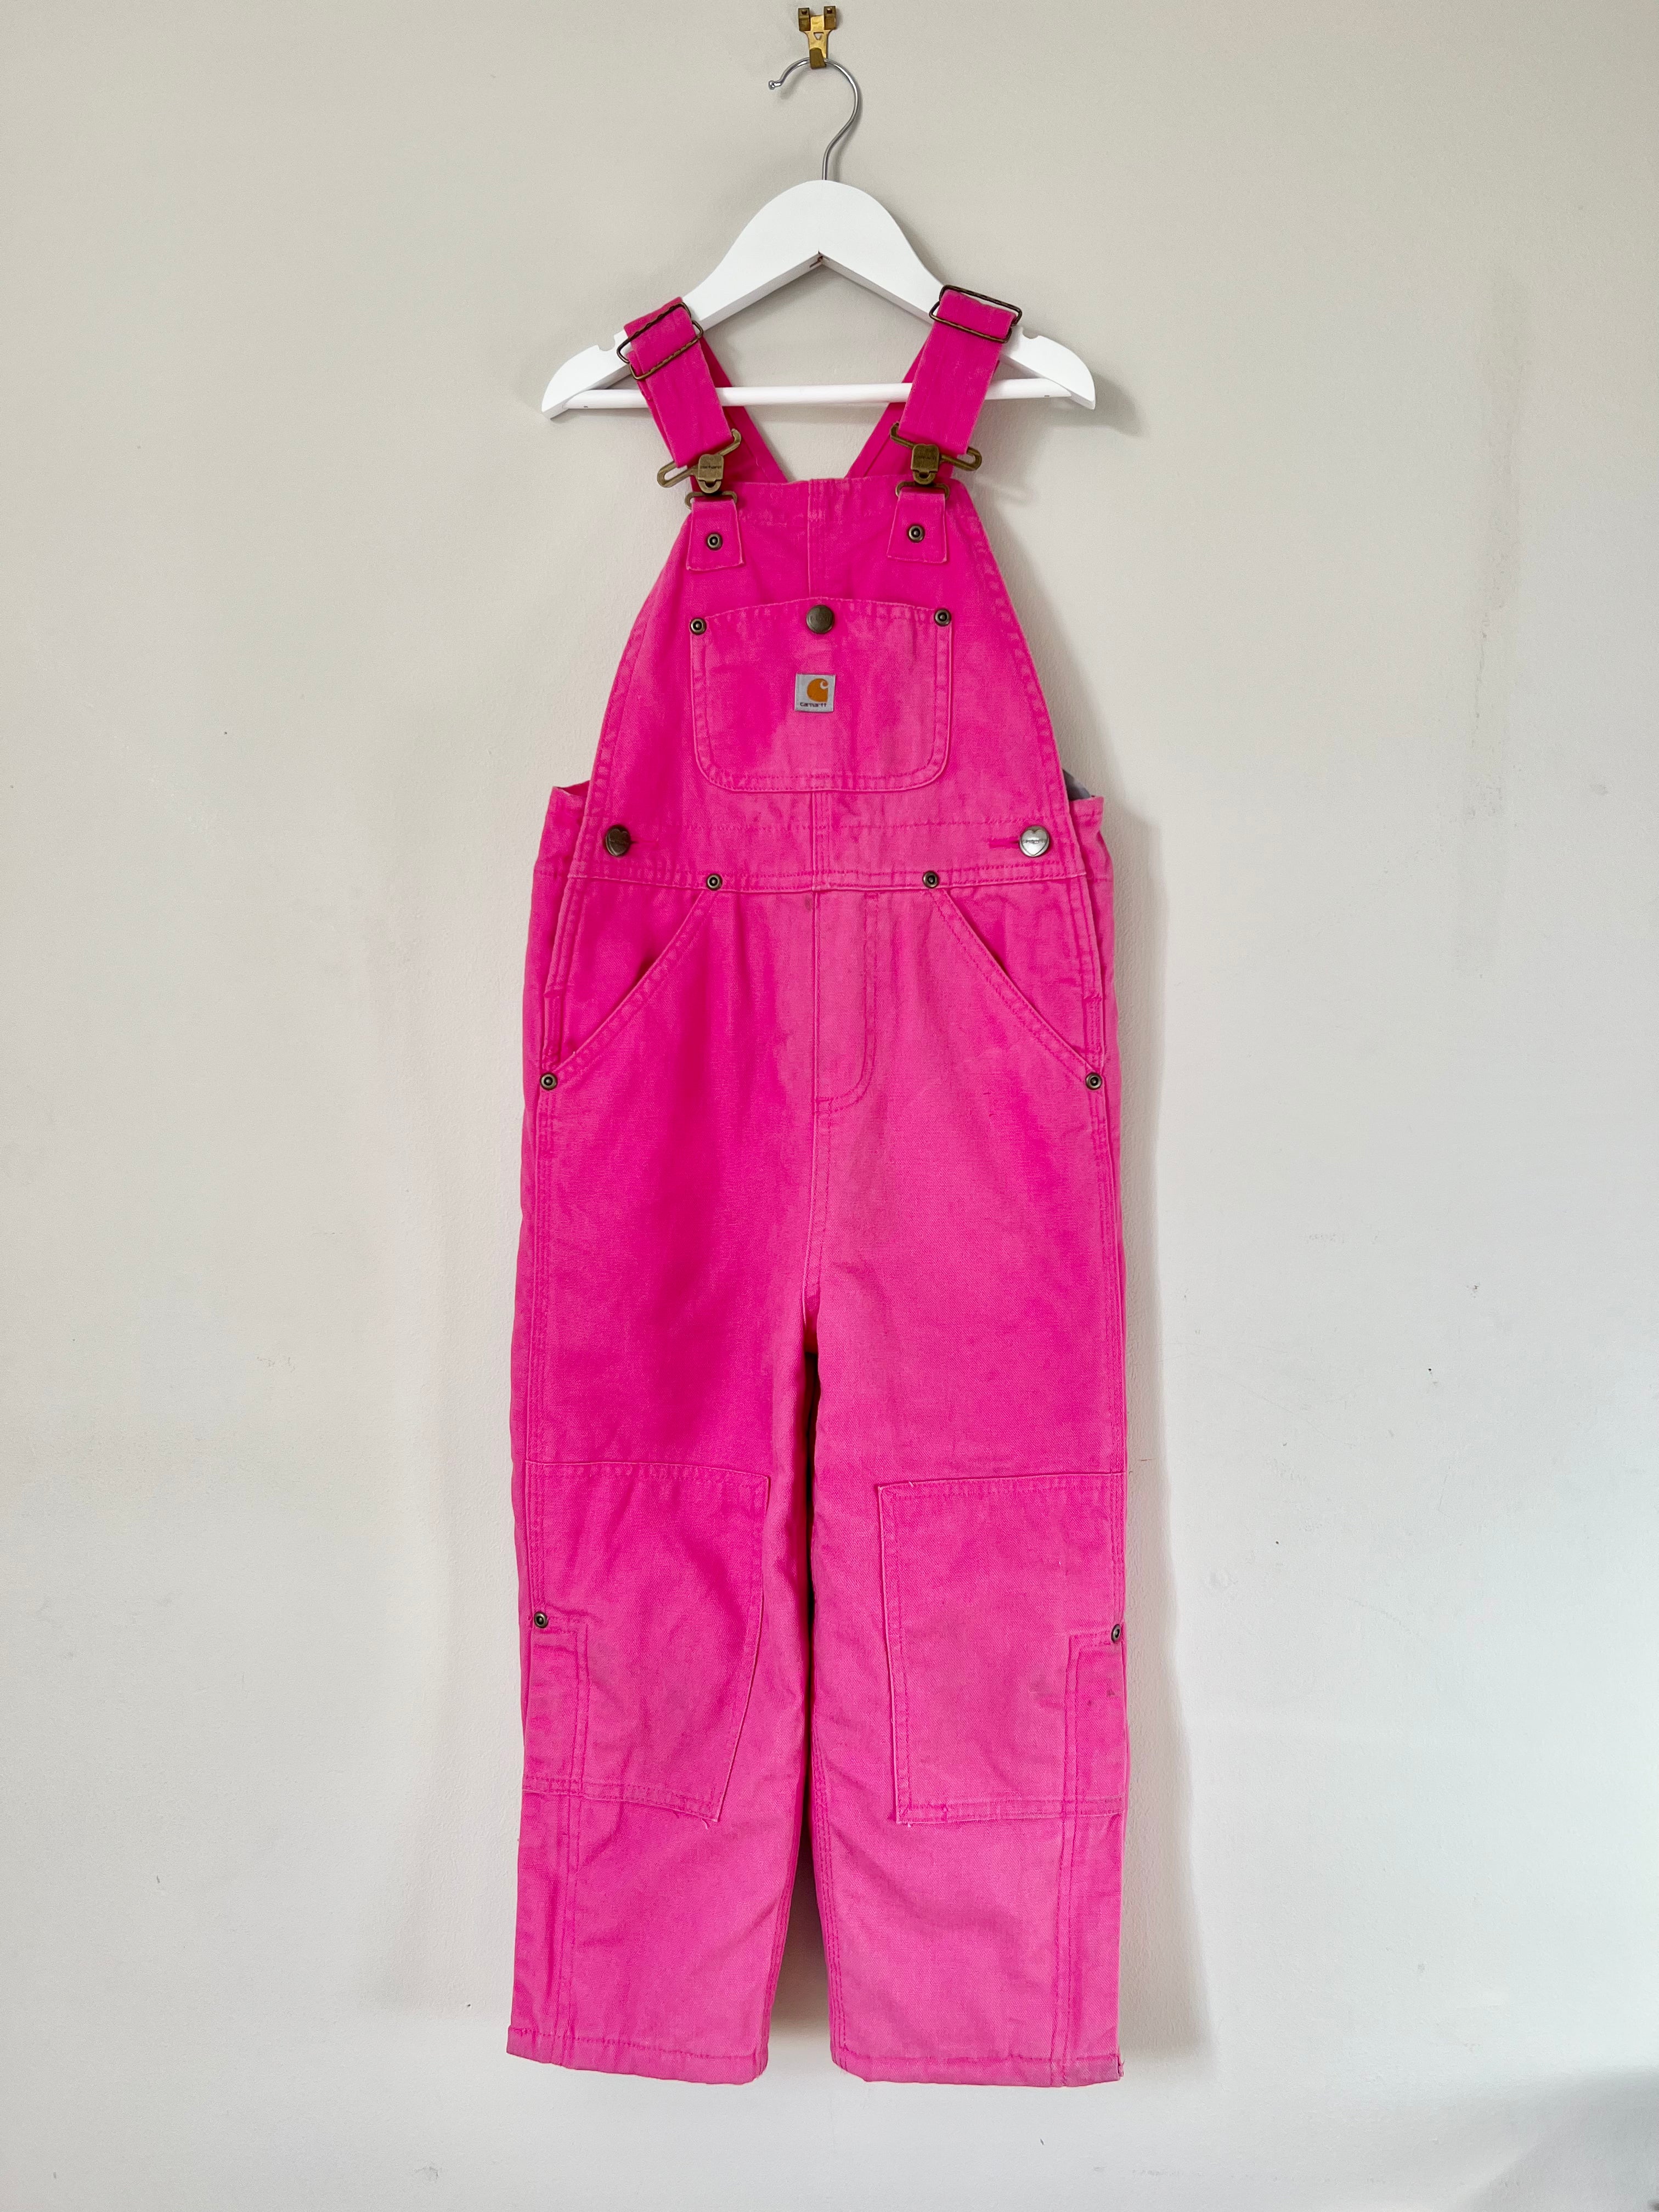 Carhartt Pink Padded Overalls Age 5